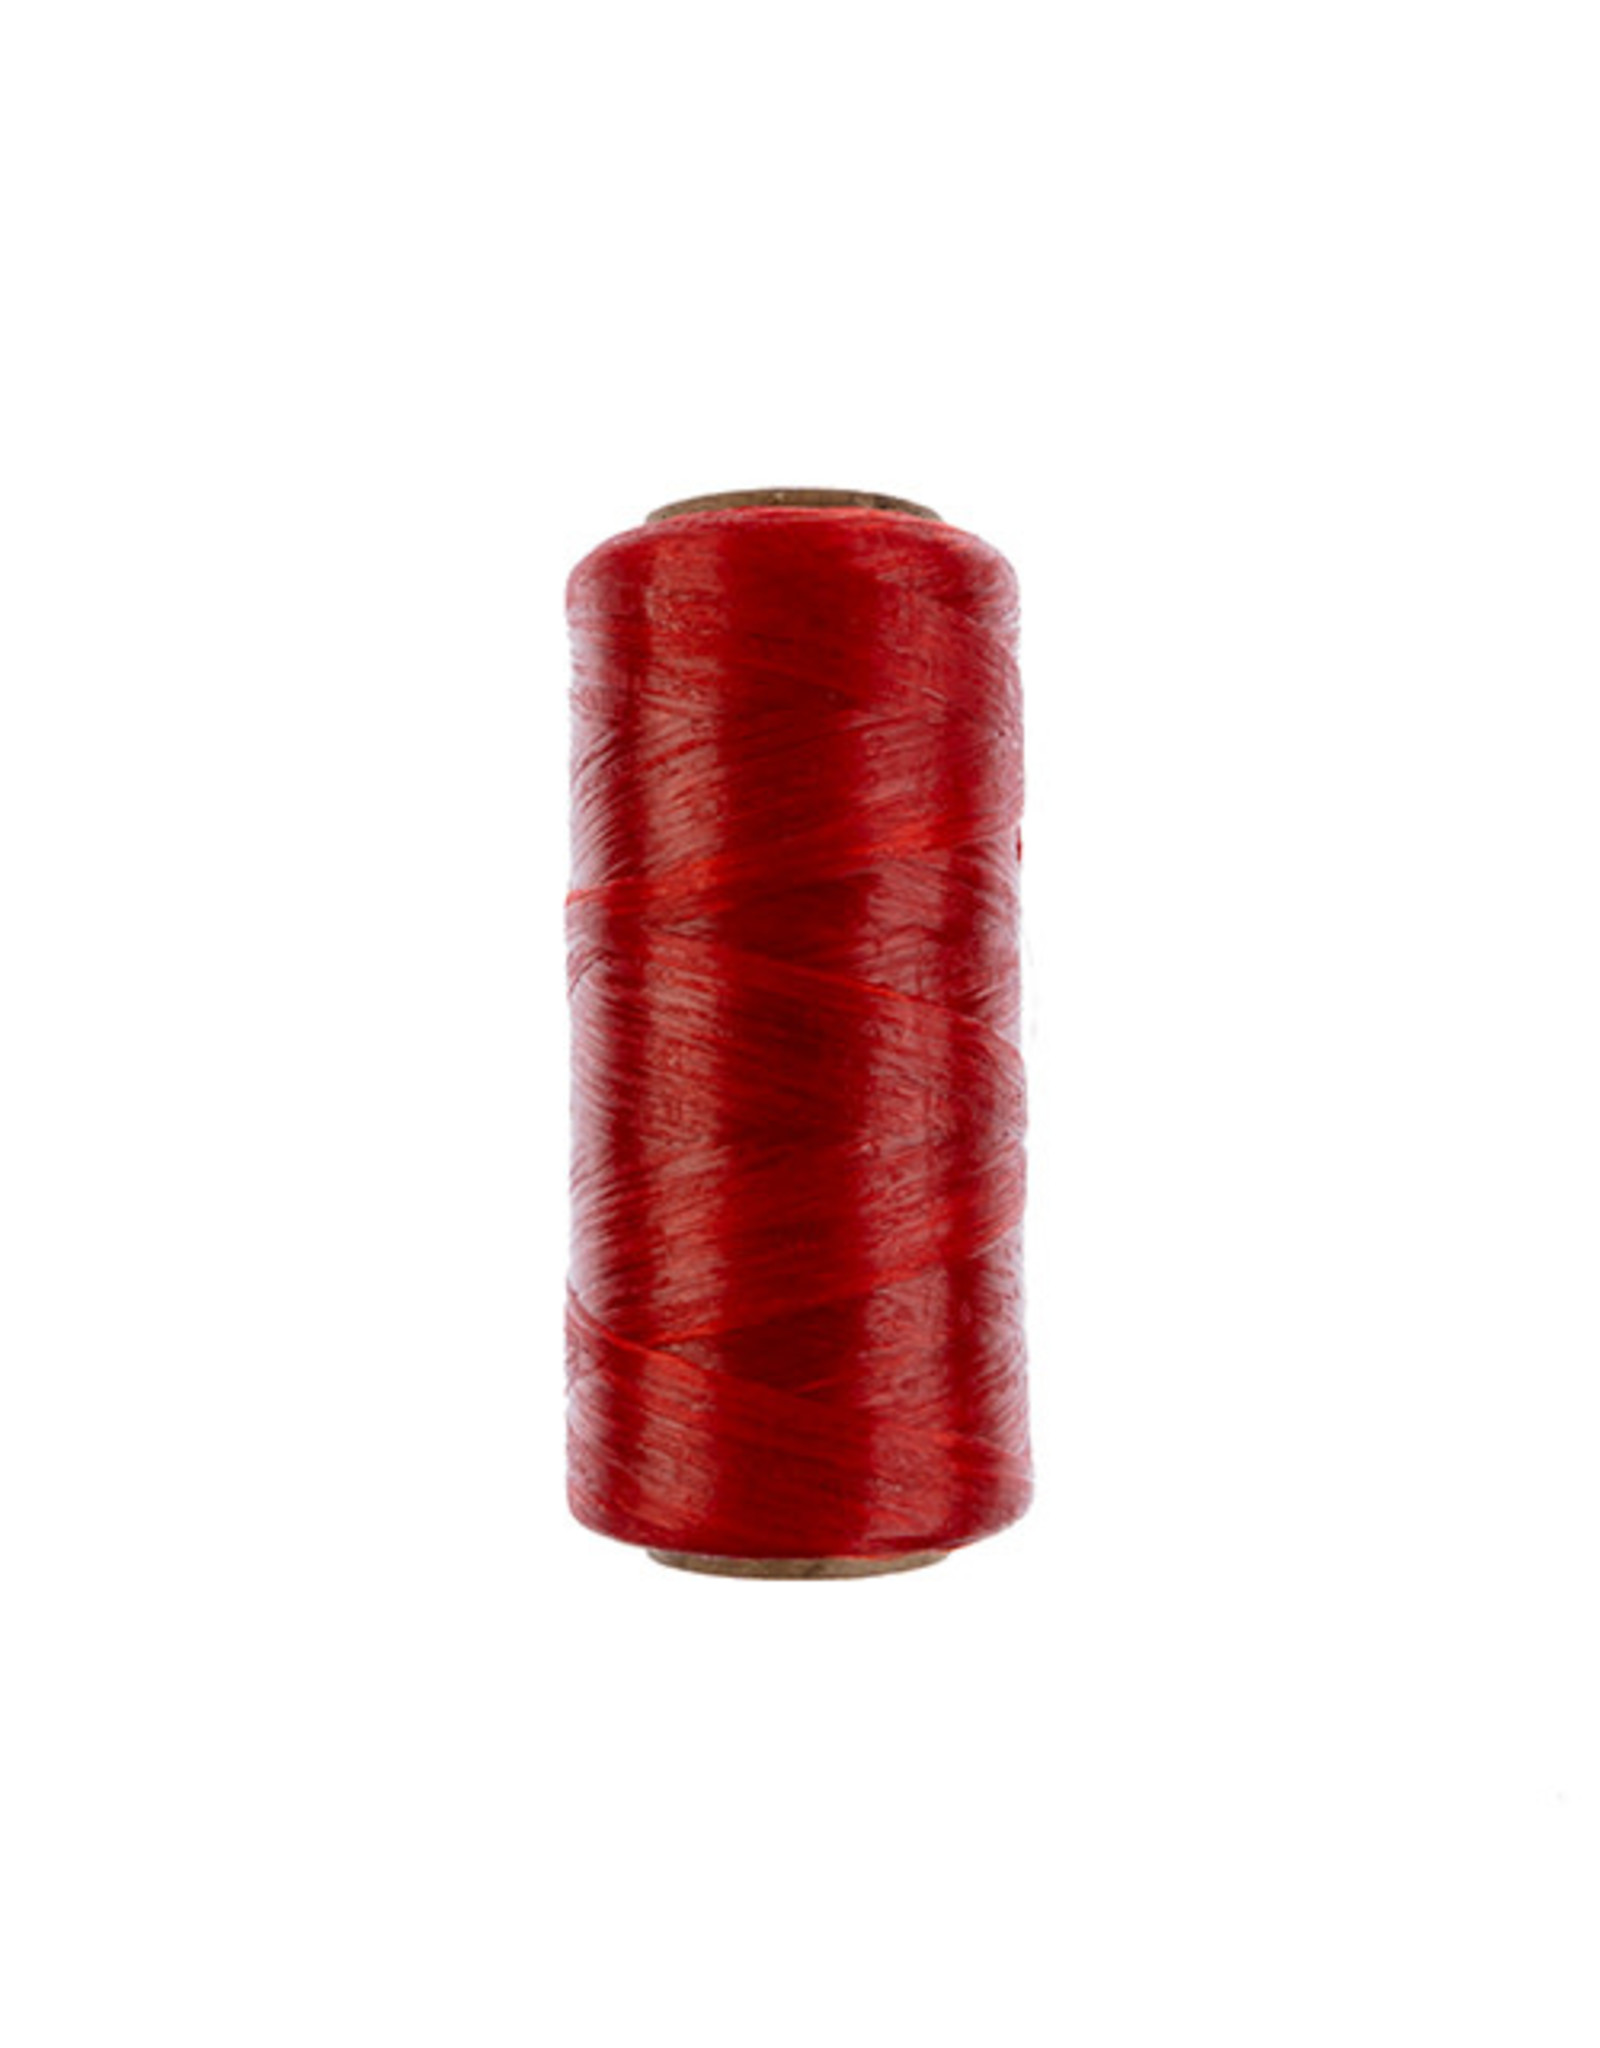 Imitation Sinew  70lb 5 Ply Red  450 ft